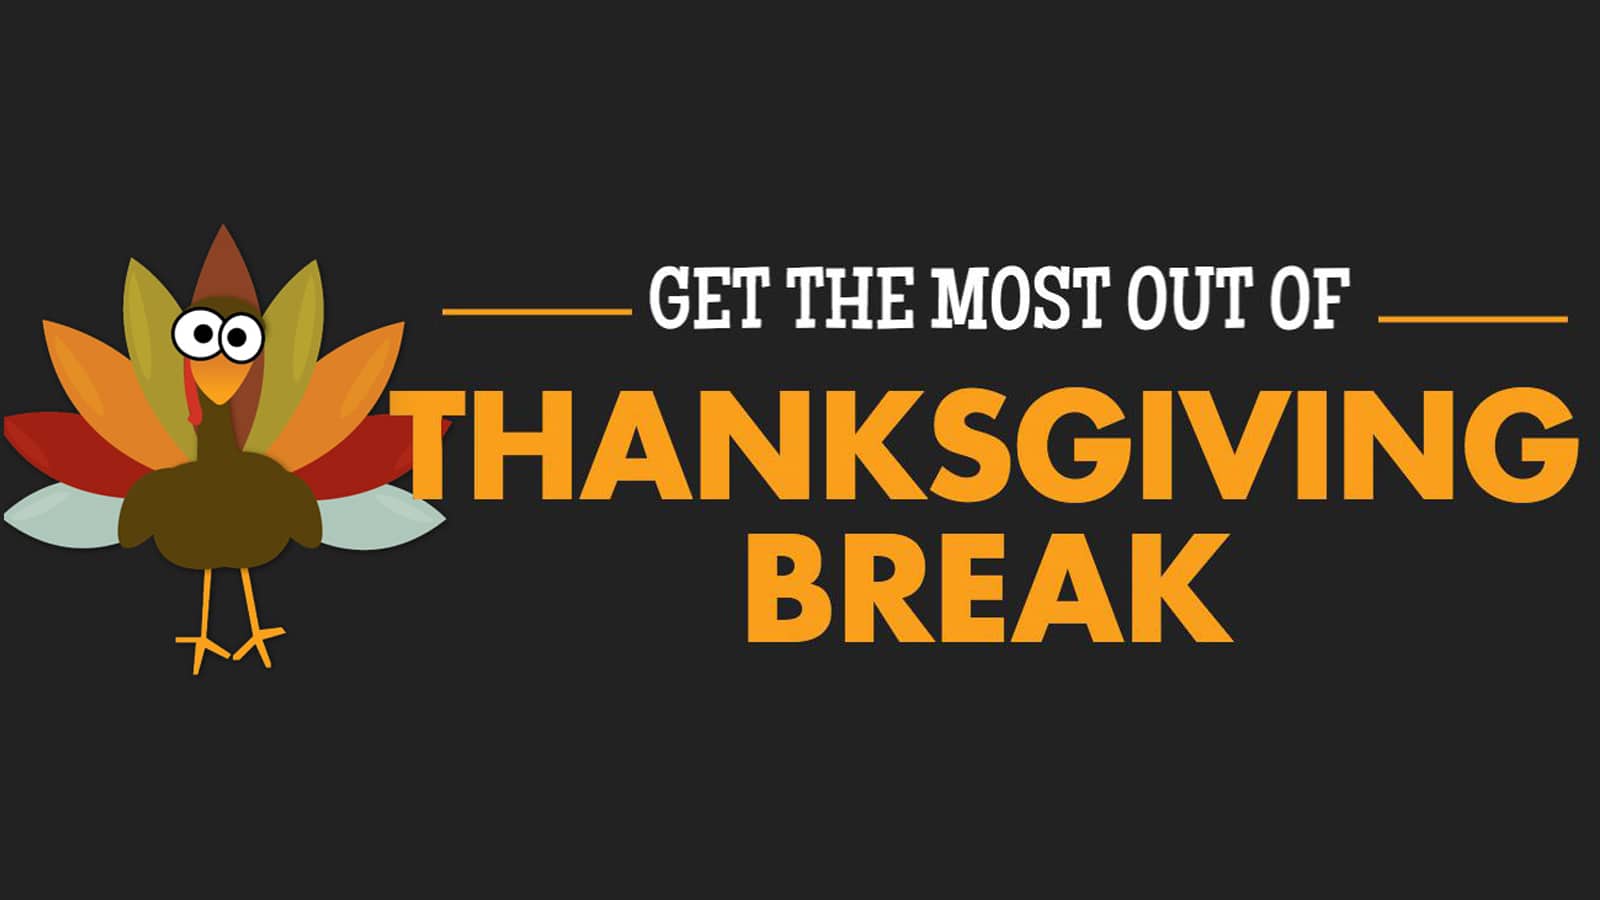 5 tips to get the most out of your Thanksgiving Break